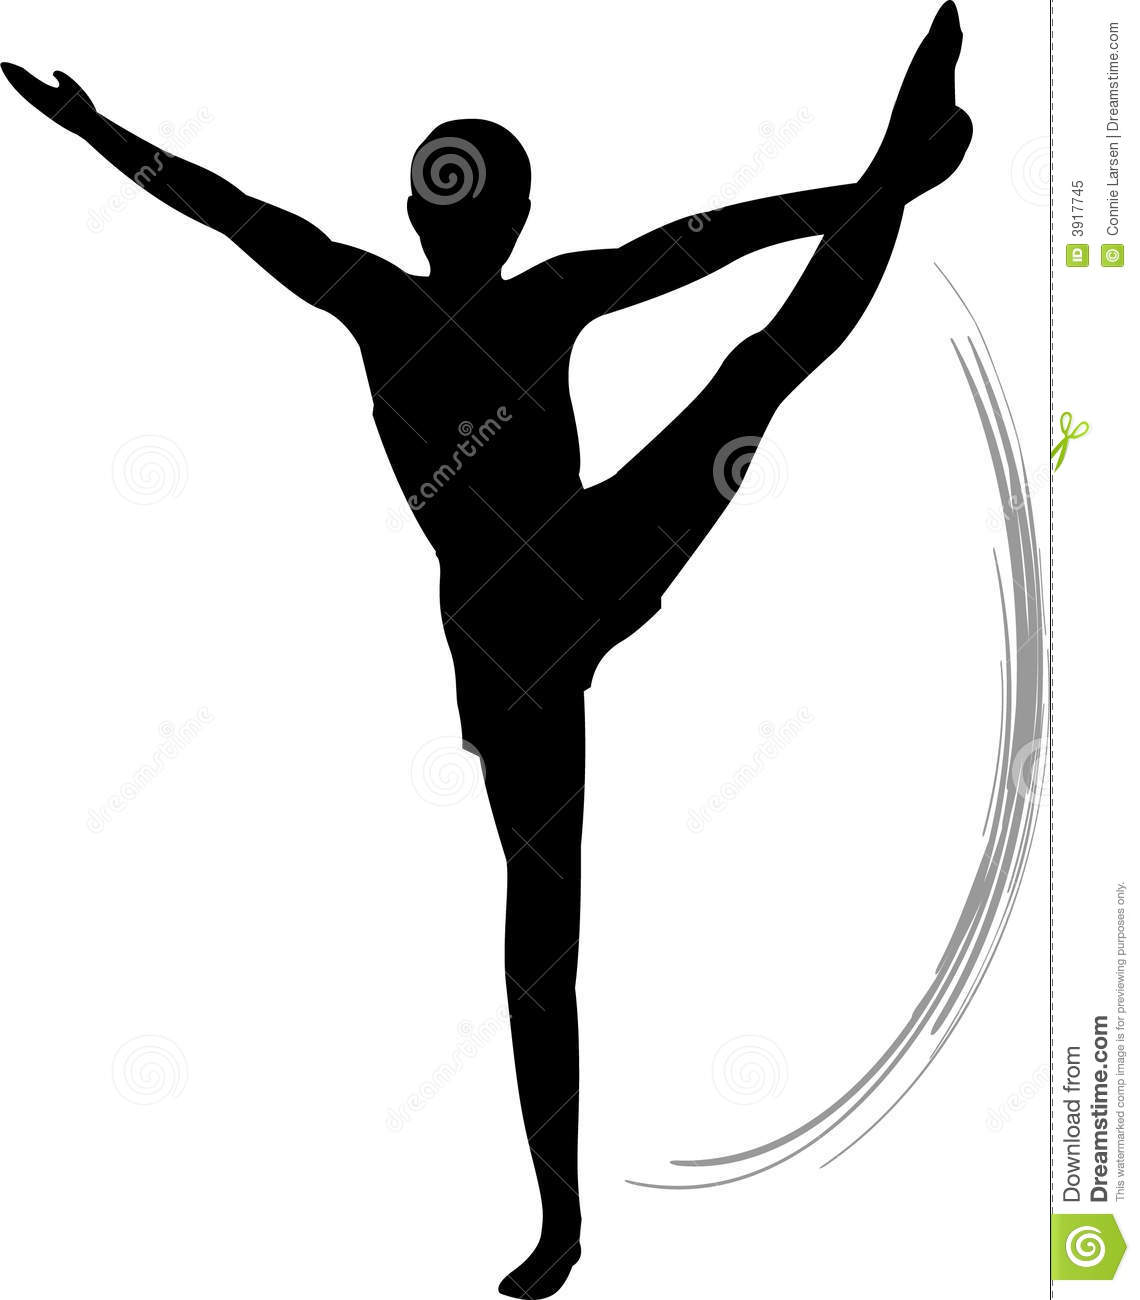 Silhouette Illustration Of A Male Gymnast Executing A Balance Scale